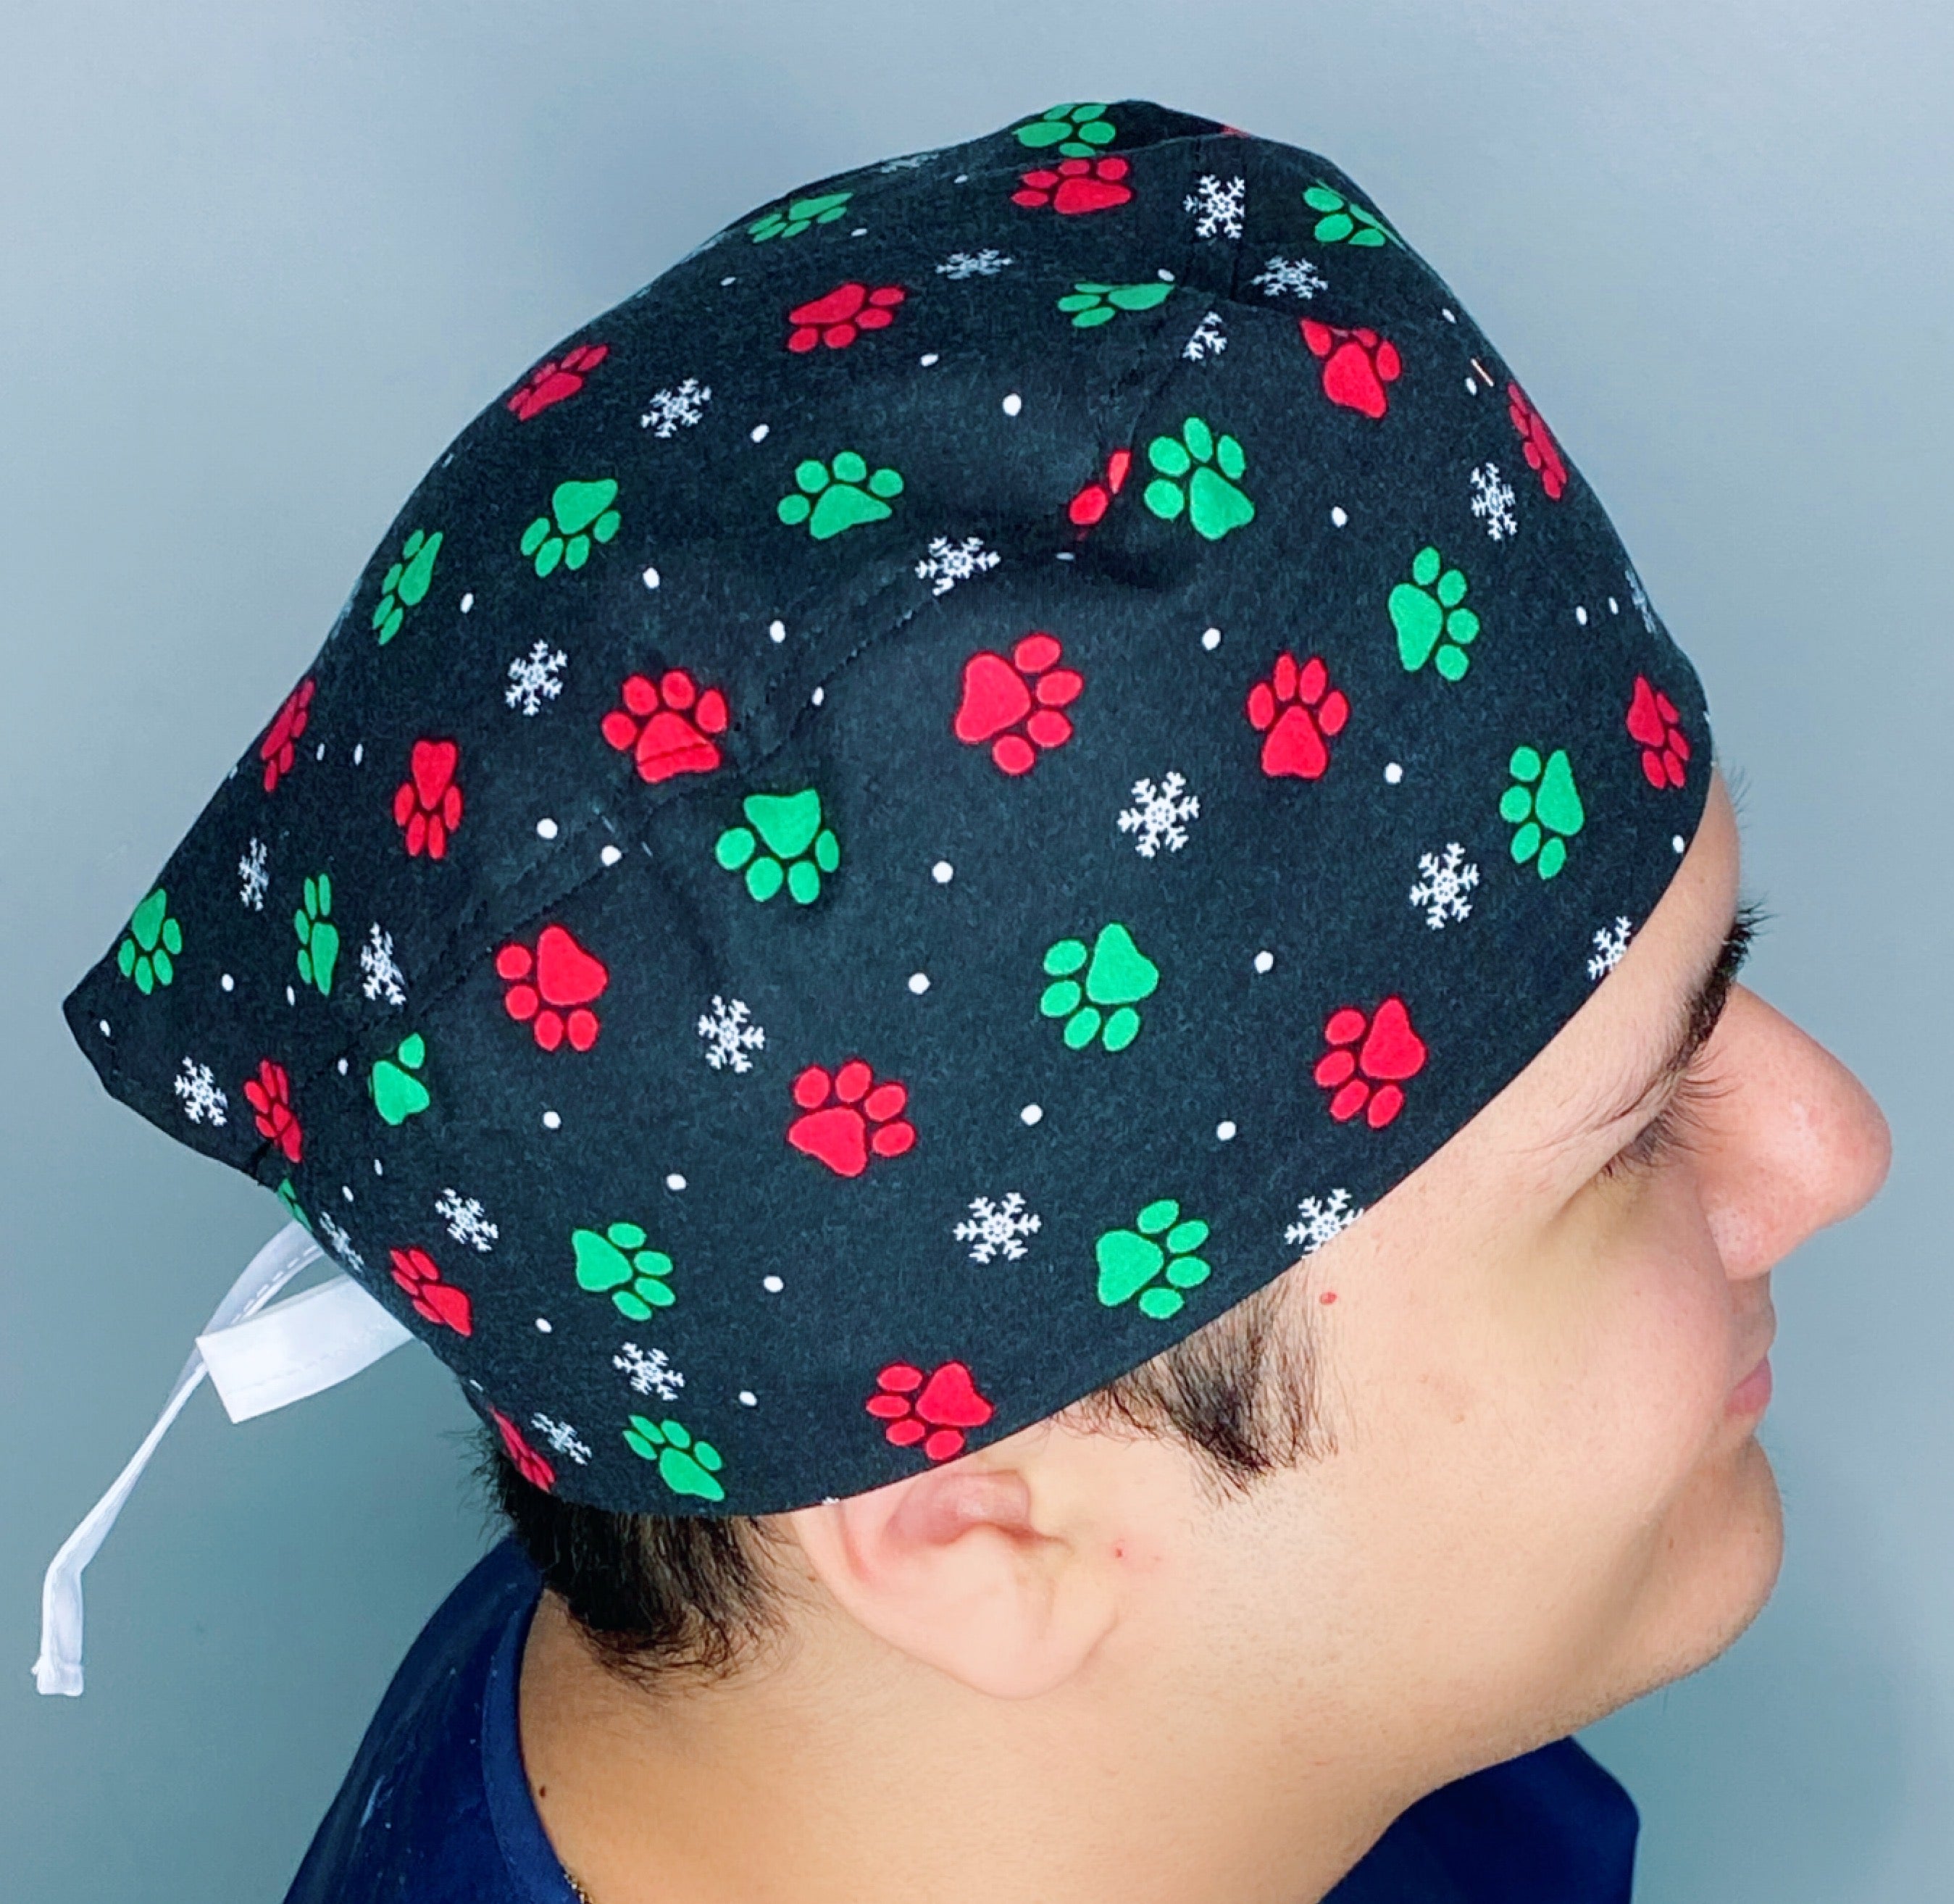 Paws & Snowflakes Dog Themed Christmas/Winter themed Unisex Holiday Scrub Cap